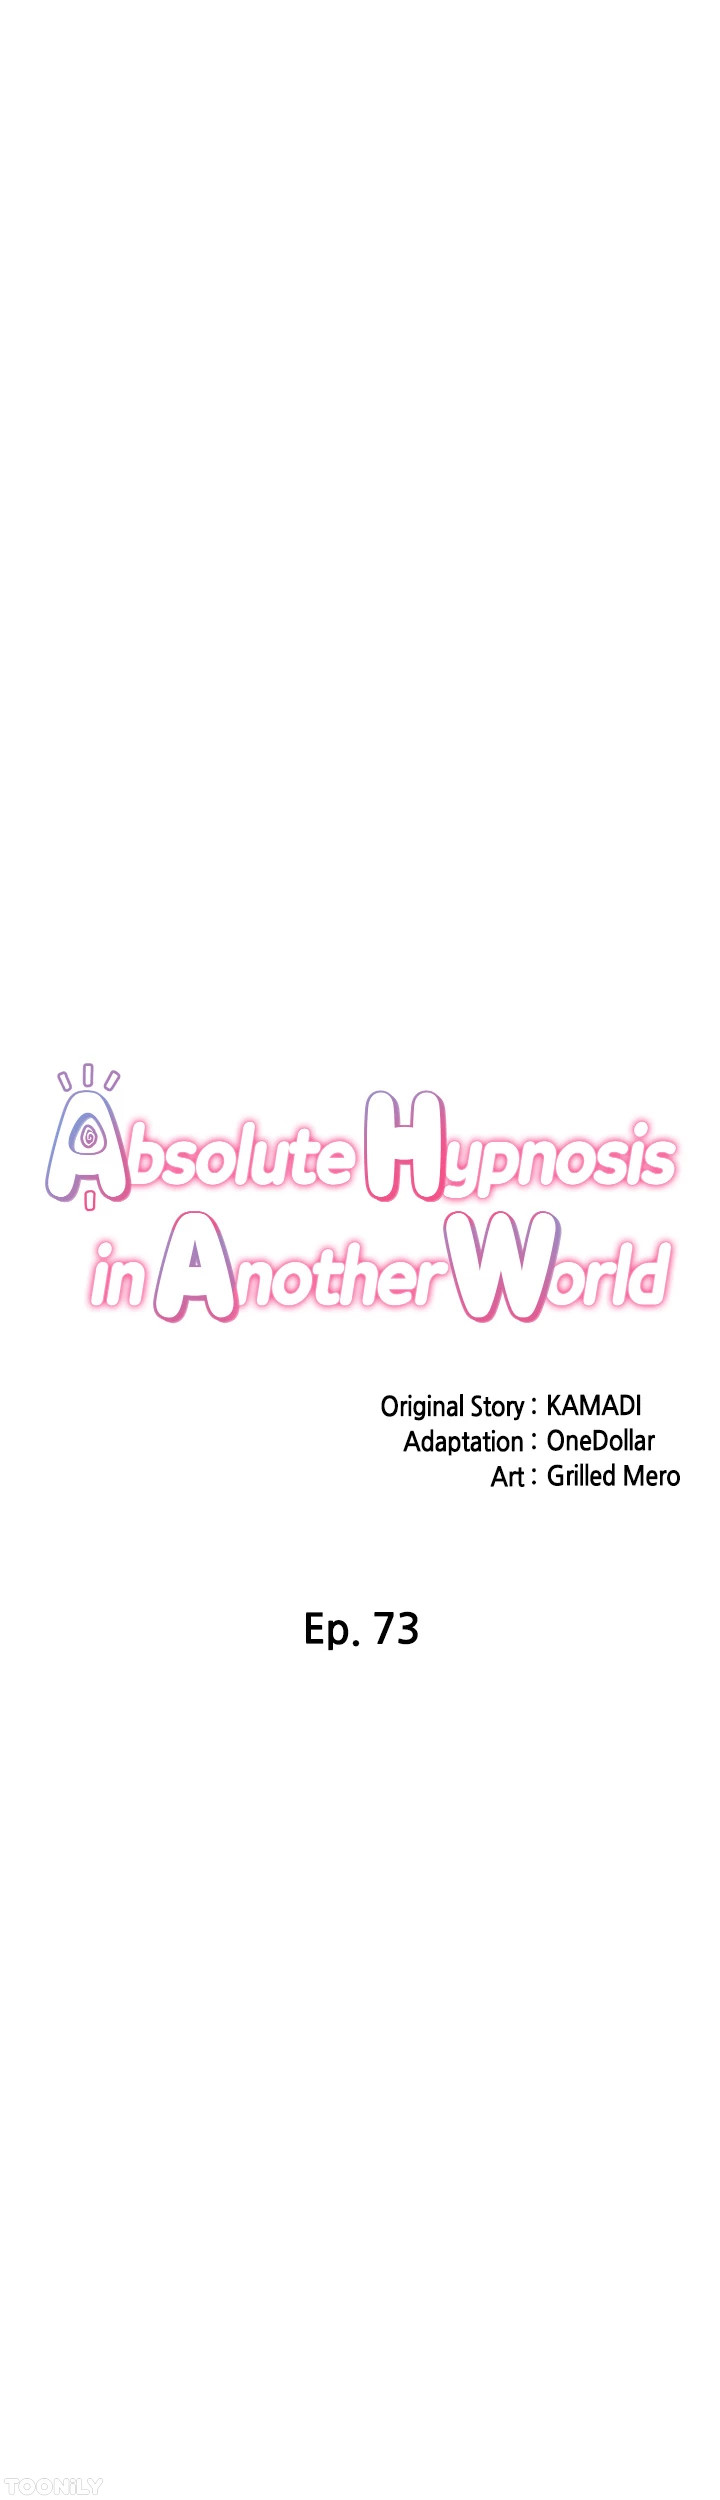 The image Absolute Hypnosis In Another World - Chapter 73 - 0602c73a394db40f28 - ManhwaManga.io